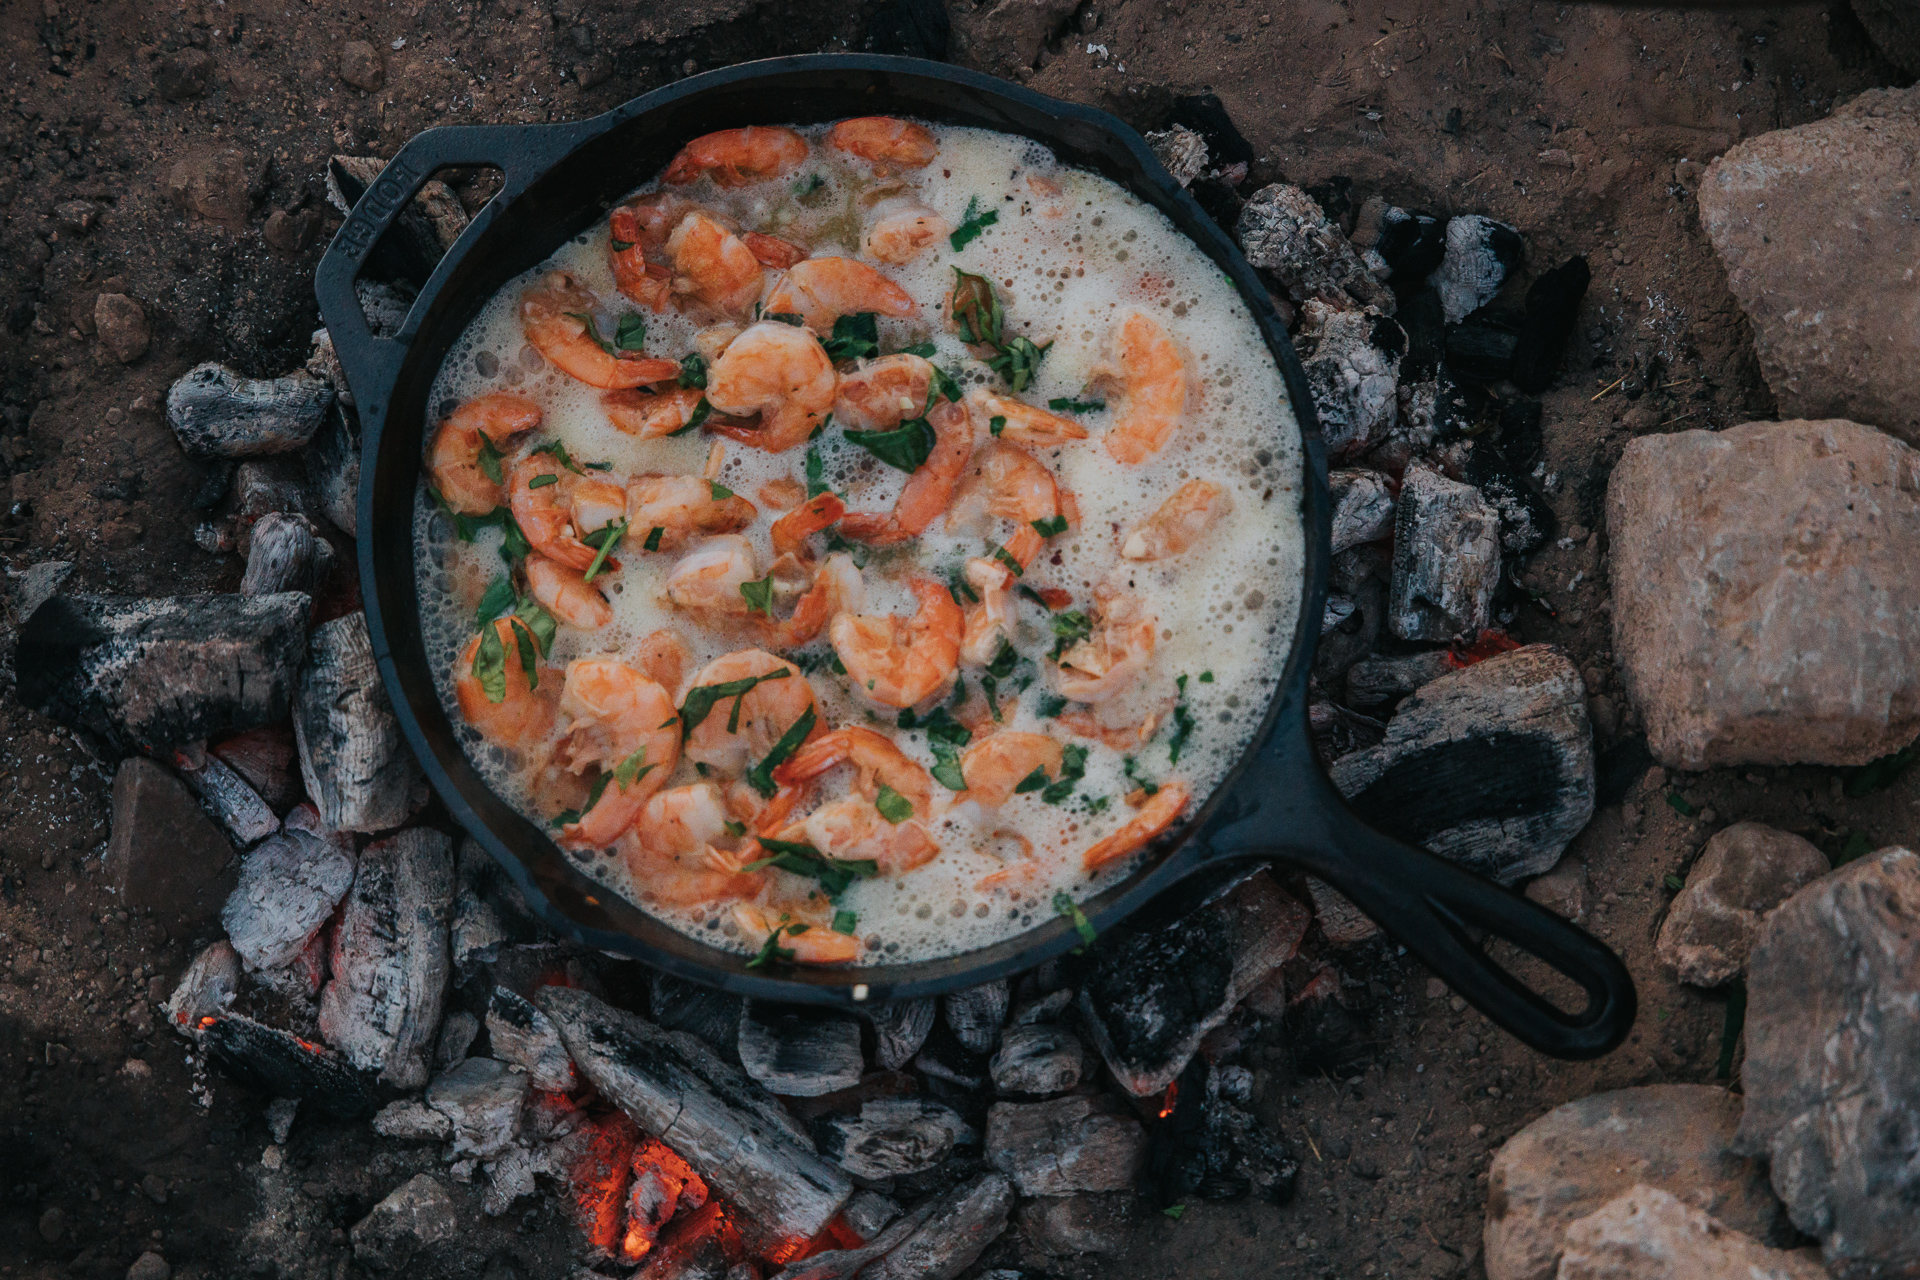 Cast iron skillet over a campfire filled with garlic butter shrimp